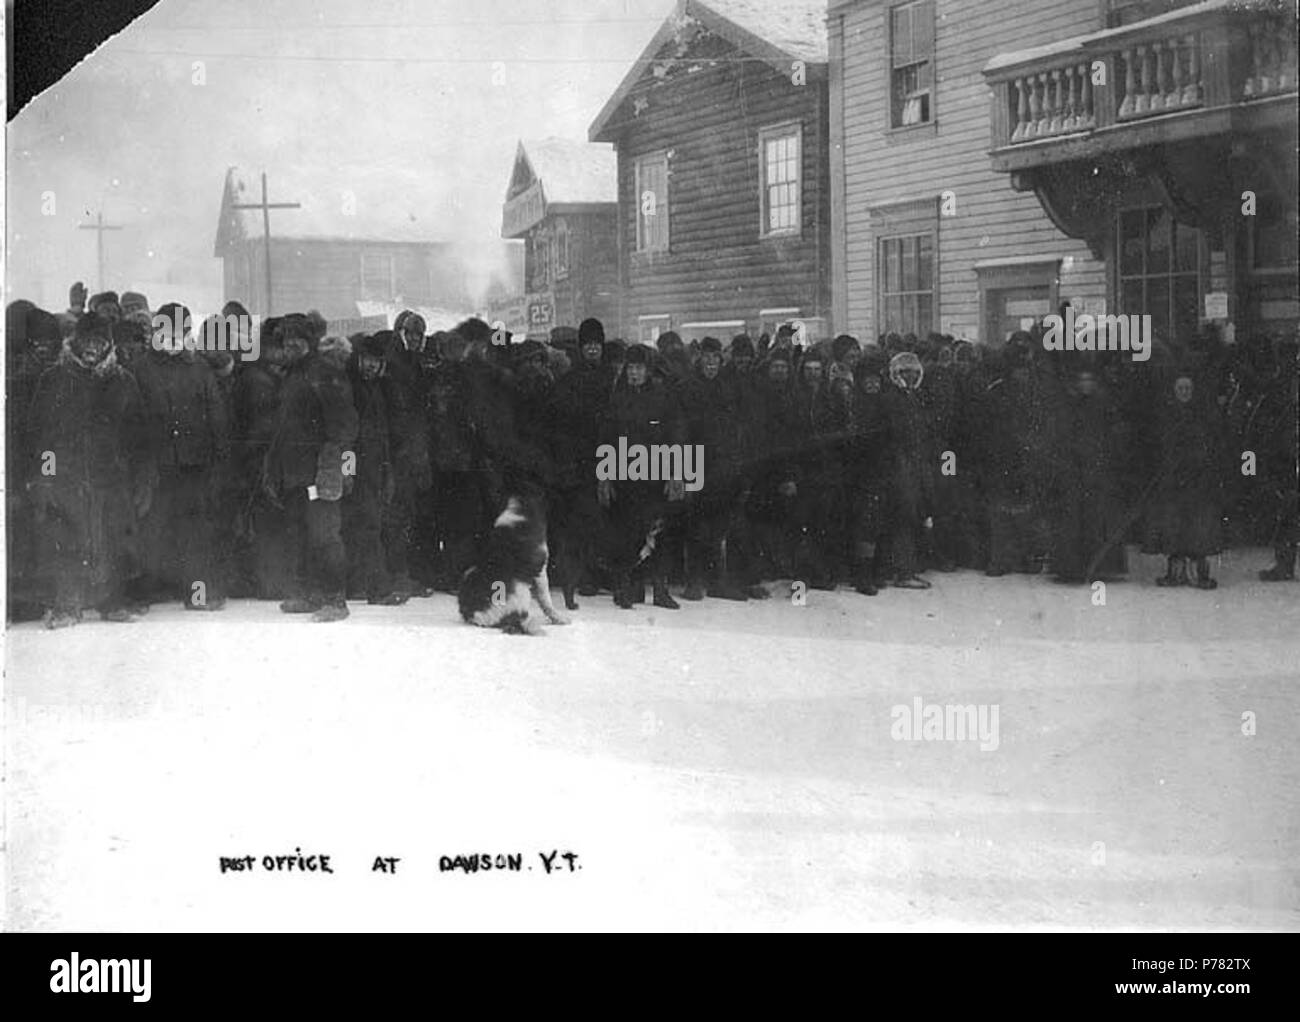 . English: Post Office at Dawson, Yukon Territory, ca. 1898. English: Shows long line of men outside of post office during winter . Caption on image: 'Post Office at Dawson Y.T.' Subjects (LCTGM): Post offices--Yukon--Dawson; Queues--Yukon--Dawson  . circa 1898 11 Post Office at Dawson, Yukon Territory, ca 1898 (HEGG 444) Stock Photo